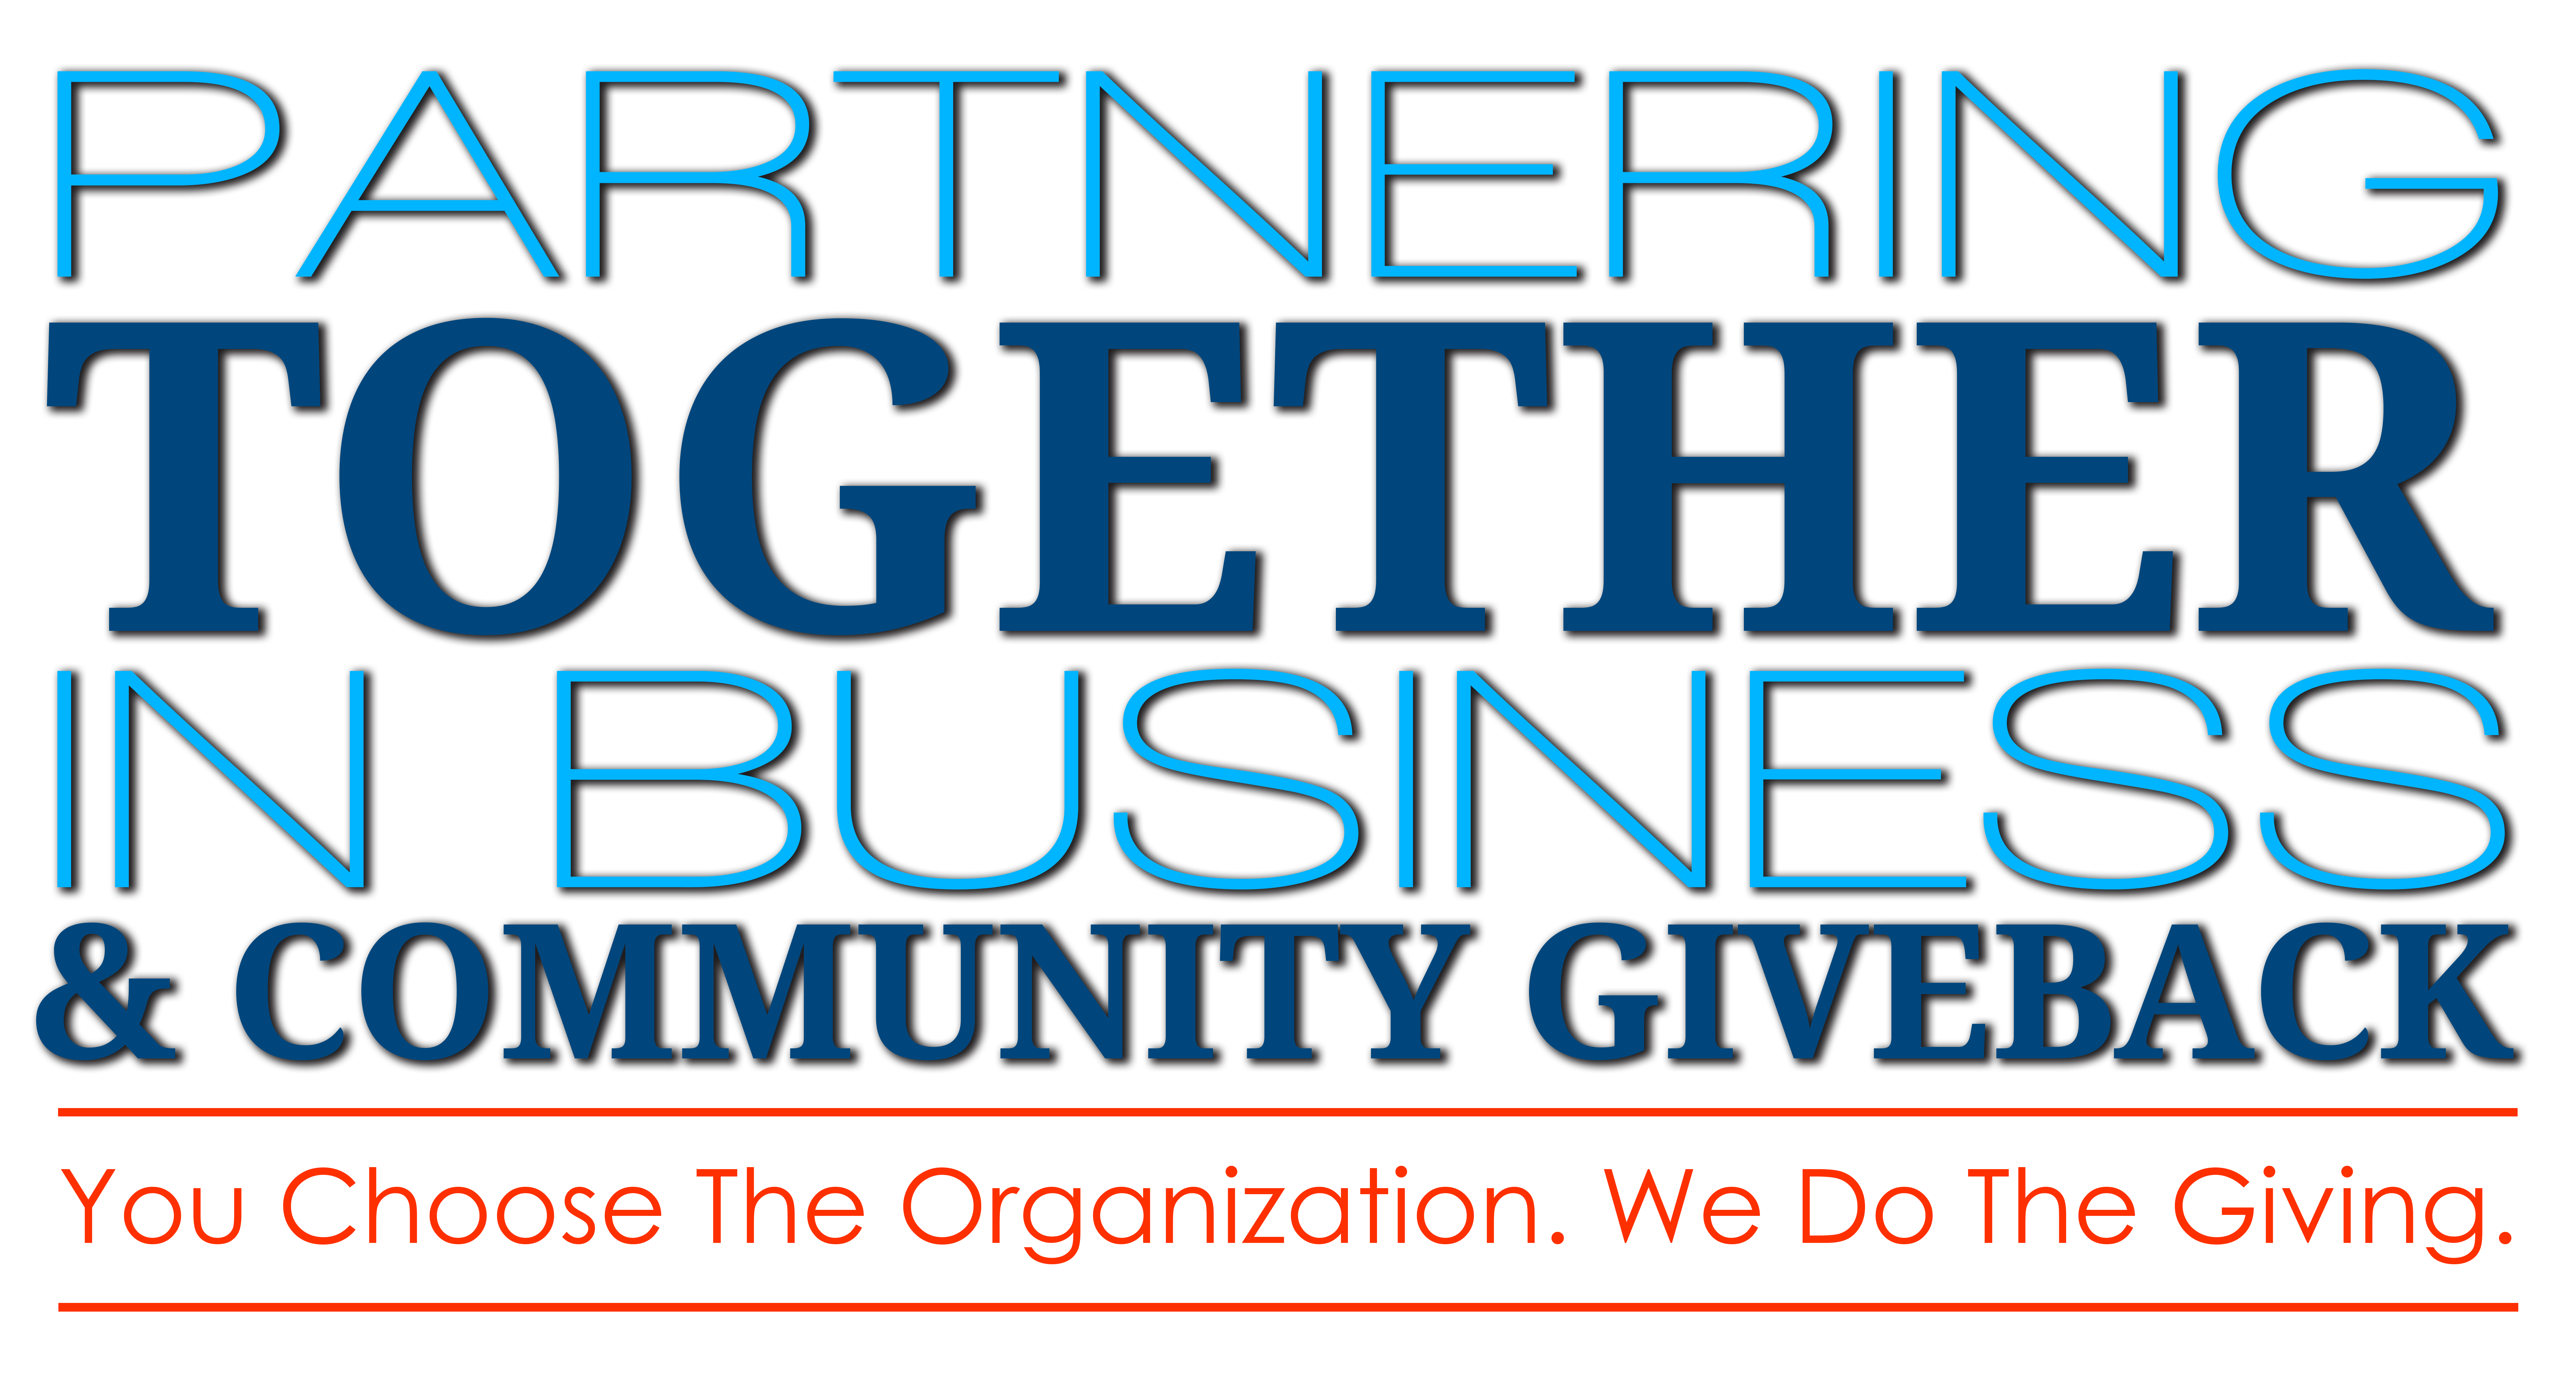 Partnering Together in Business and Giving